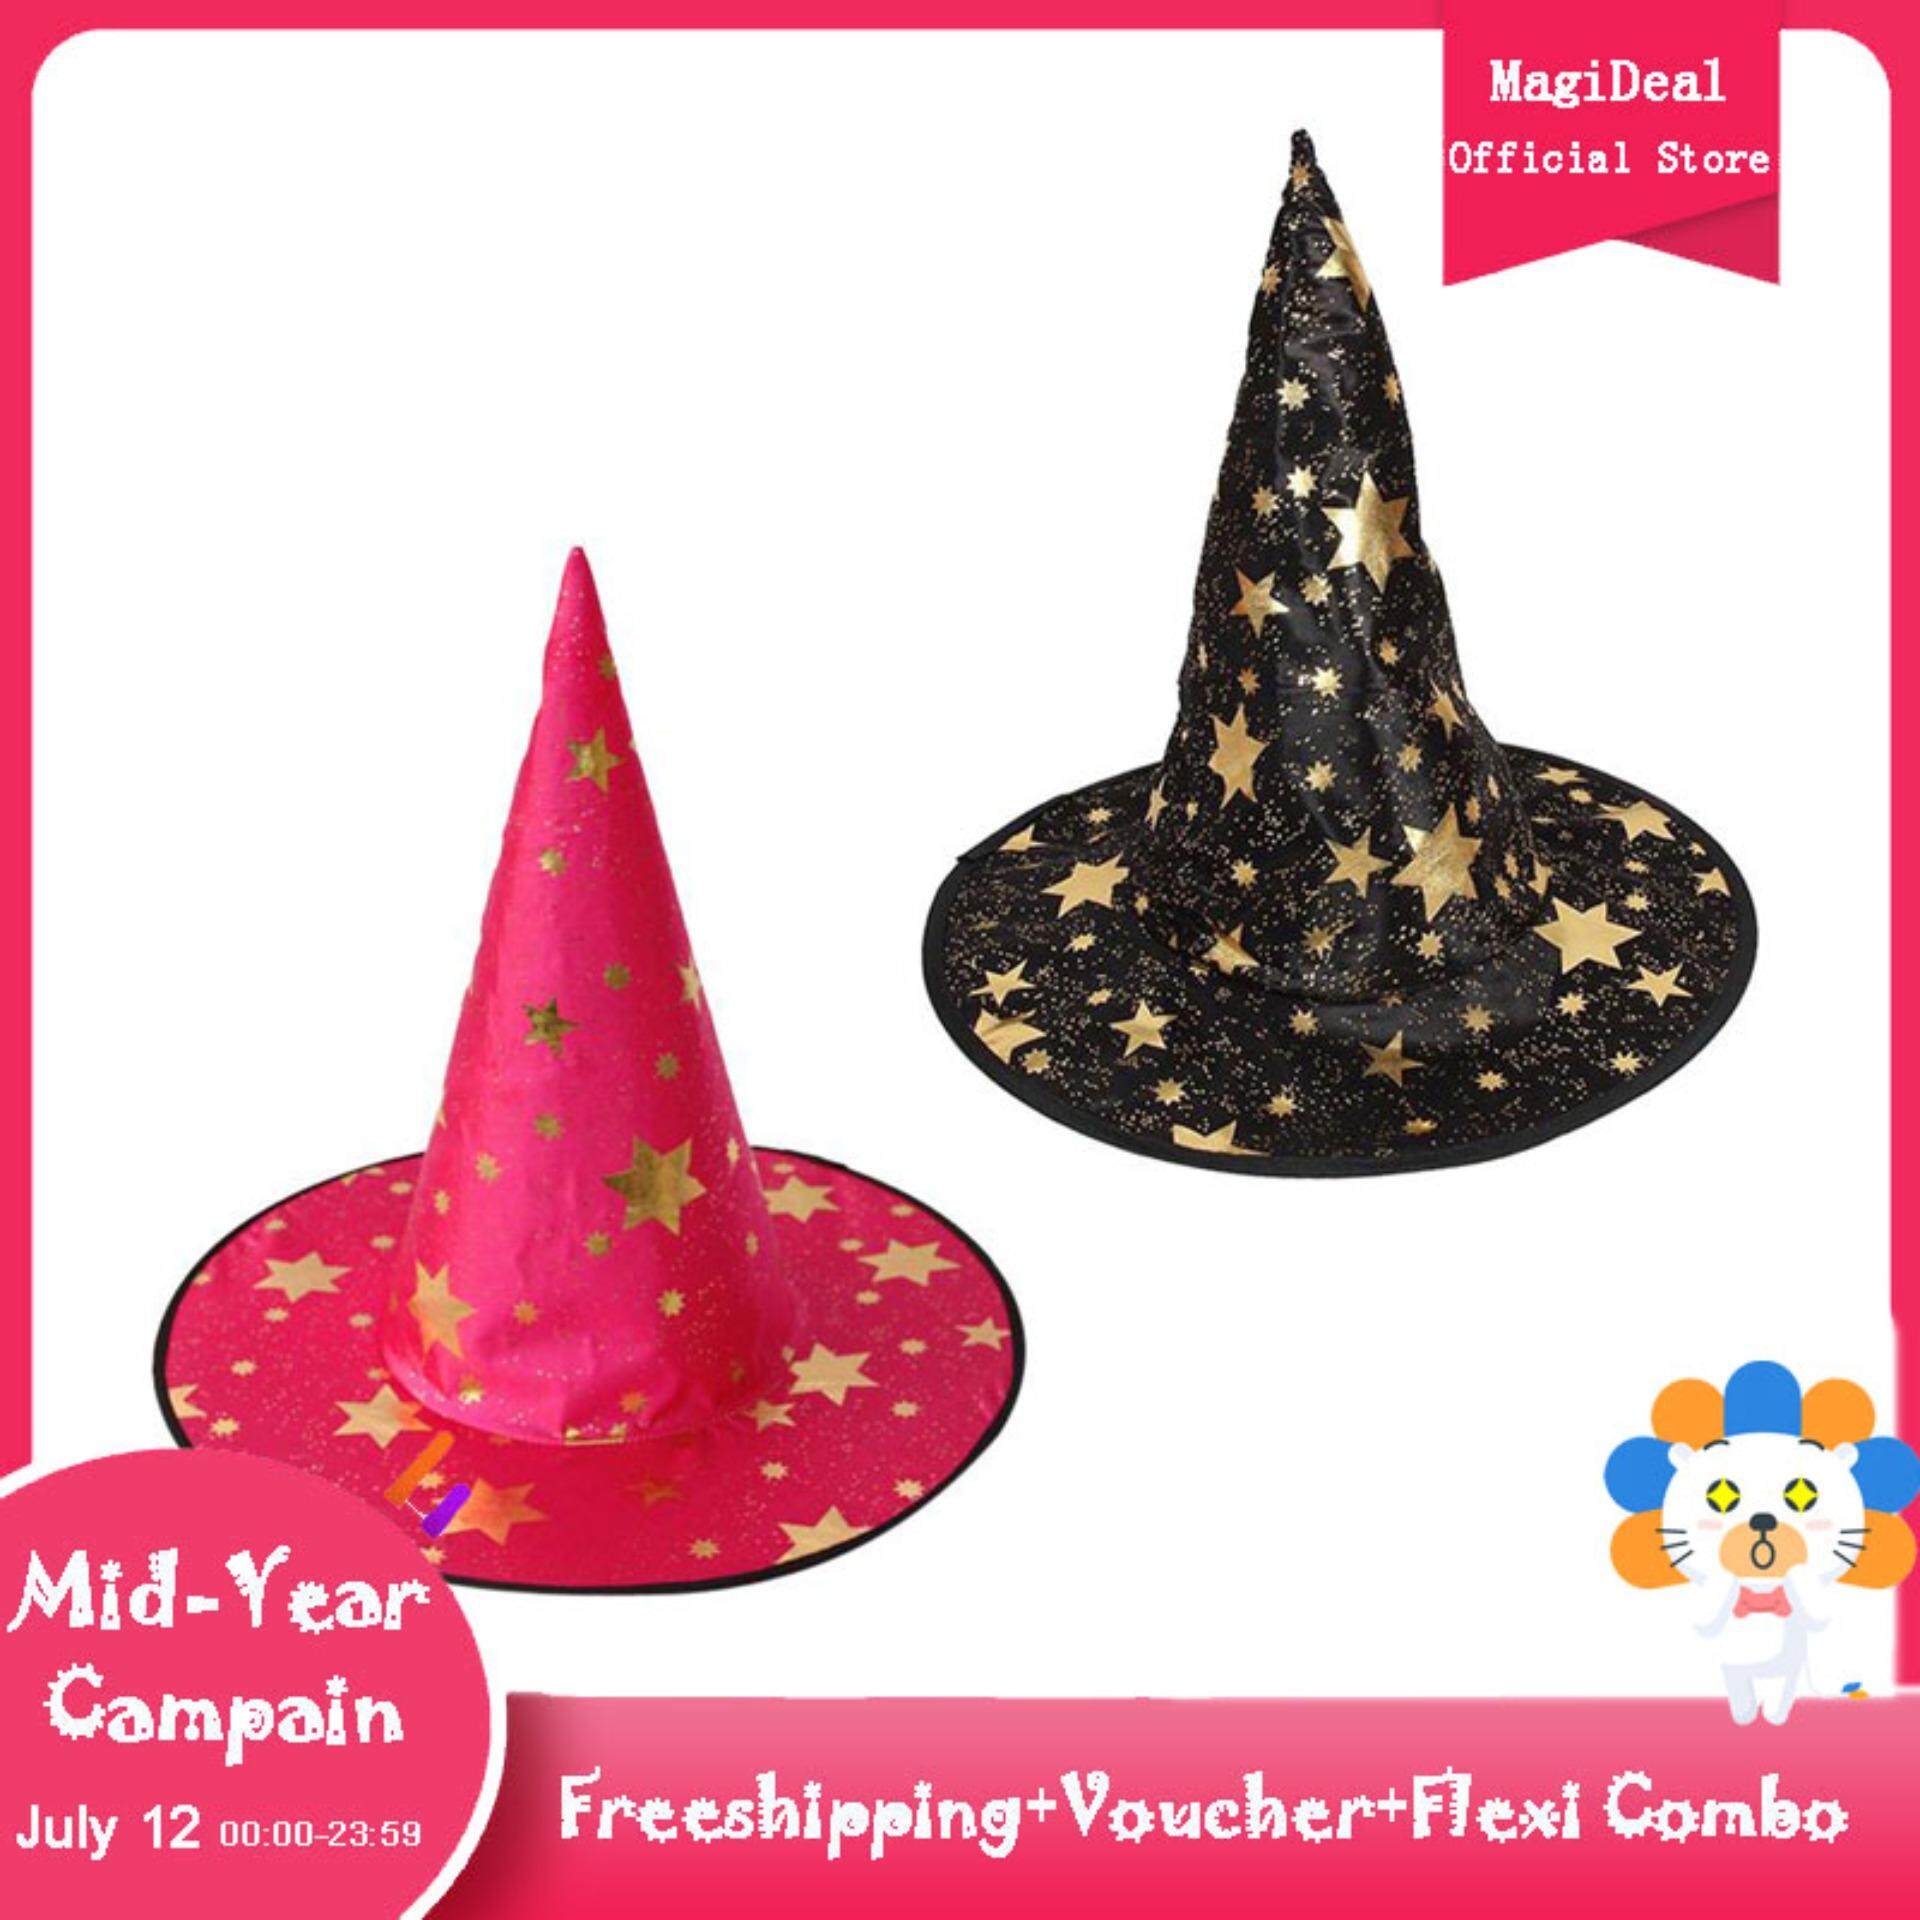 MagiDeal 2 Pieces Unisex Kids Wizard Witch Hats Pointed Hat Halloween Fancy Dress Black Rose Costume Cape Hats Accessories